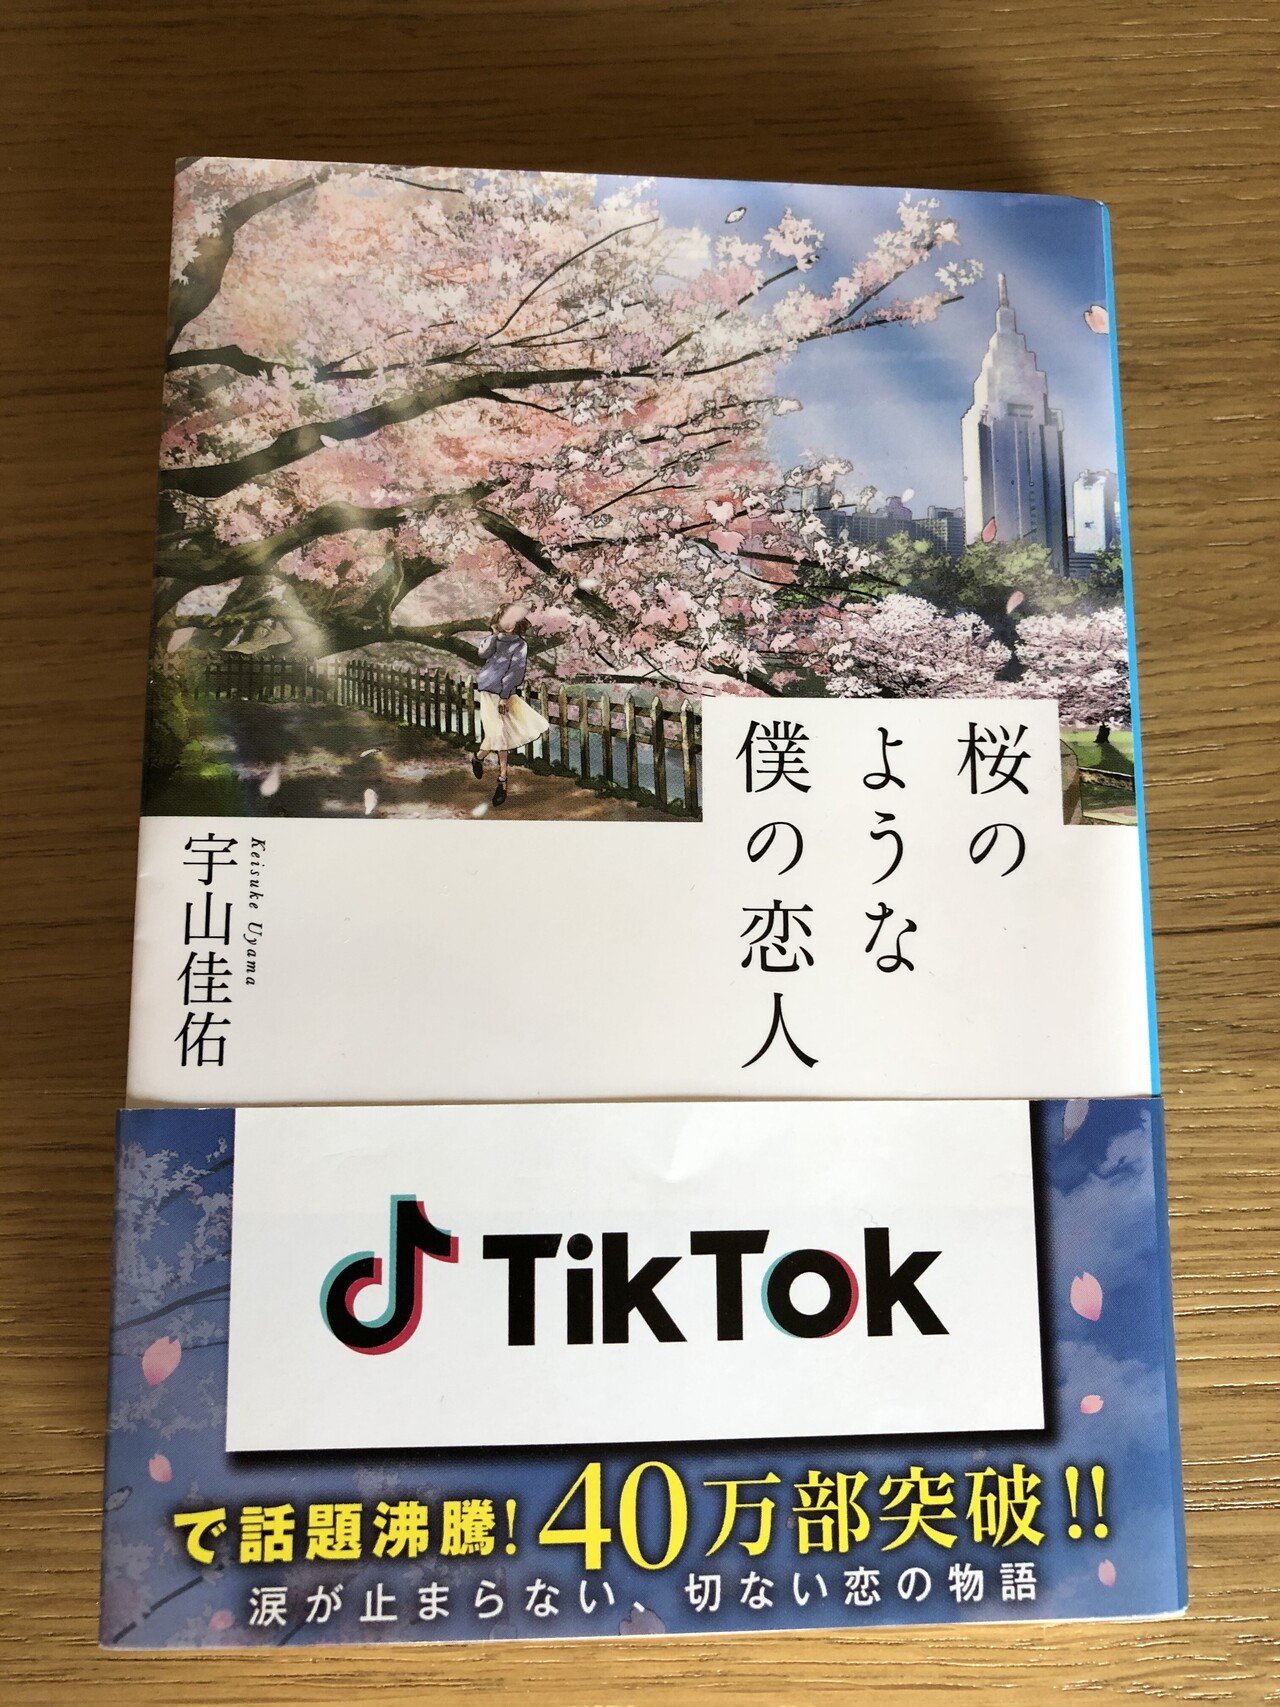 Tiktokで話題沸騰の恋愛小説を読んでみた 東スポnote